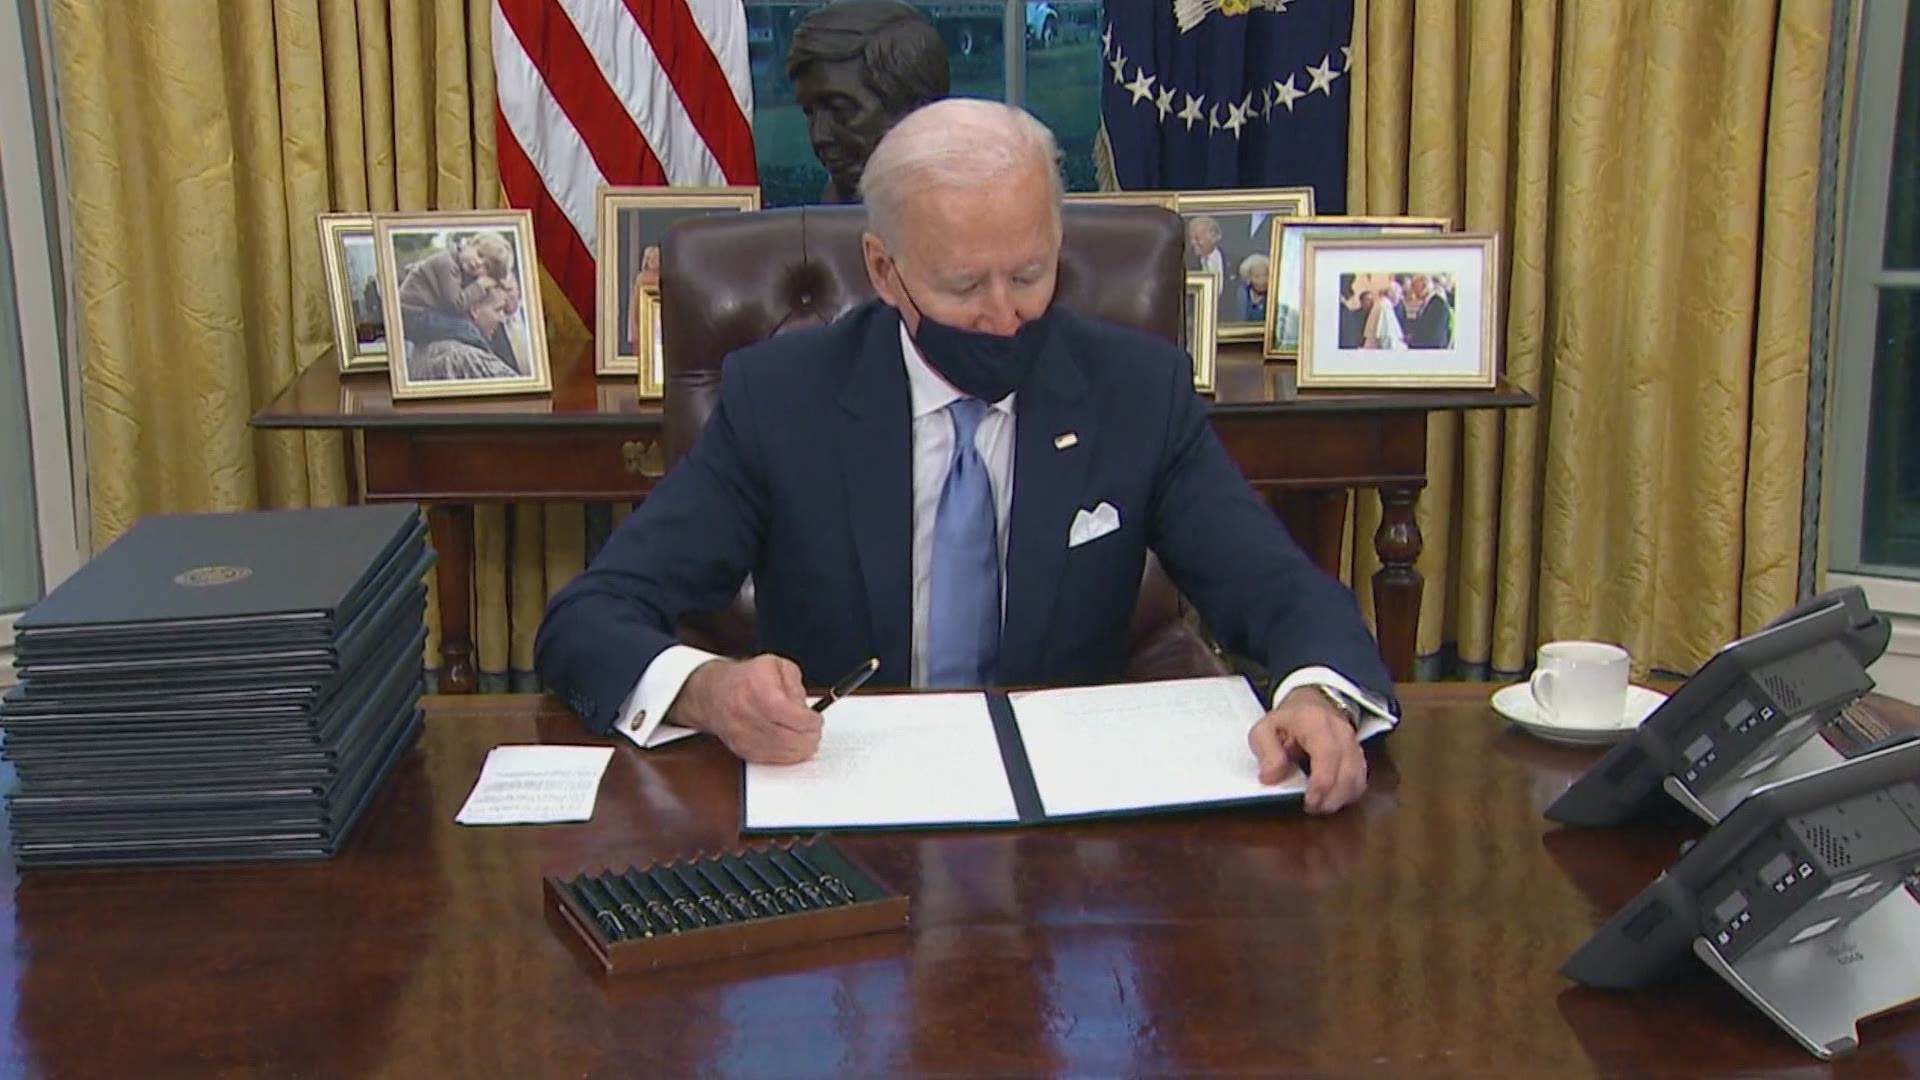 President Biden took action on his first day in office. Here's what's changing.